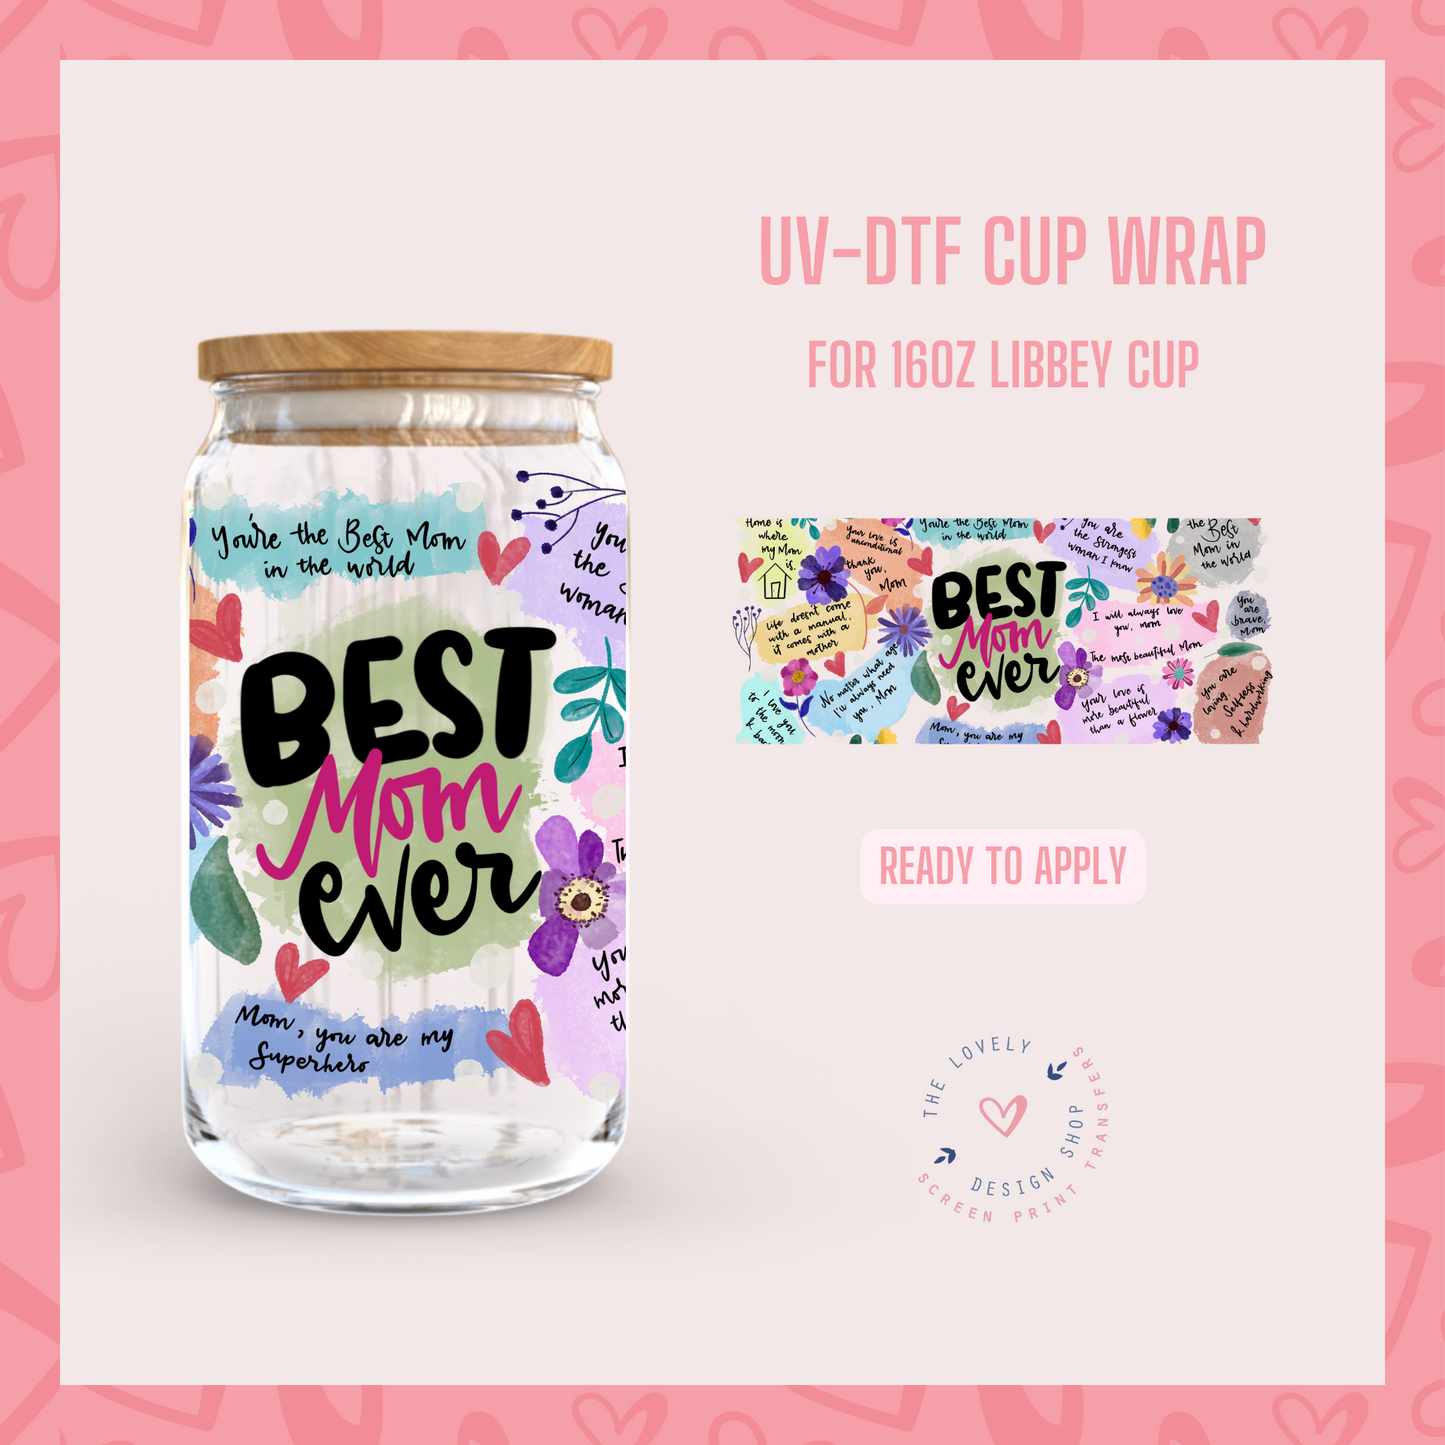 Best Mom Ever - UV DTF 16 oz Libbey Cup Wrap (Ready to Ship)